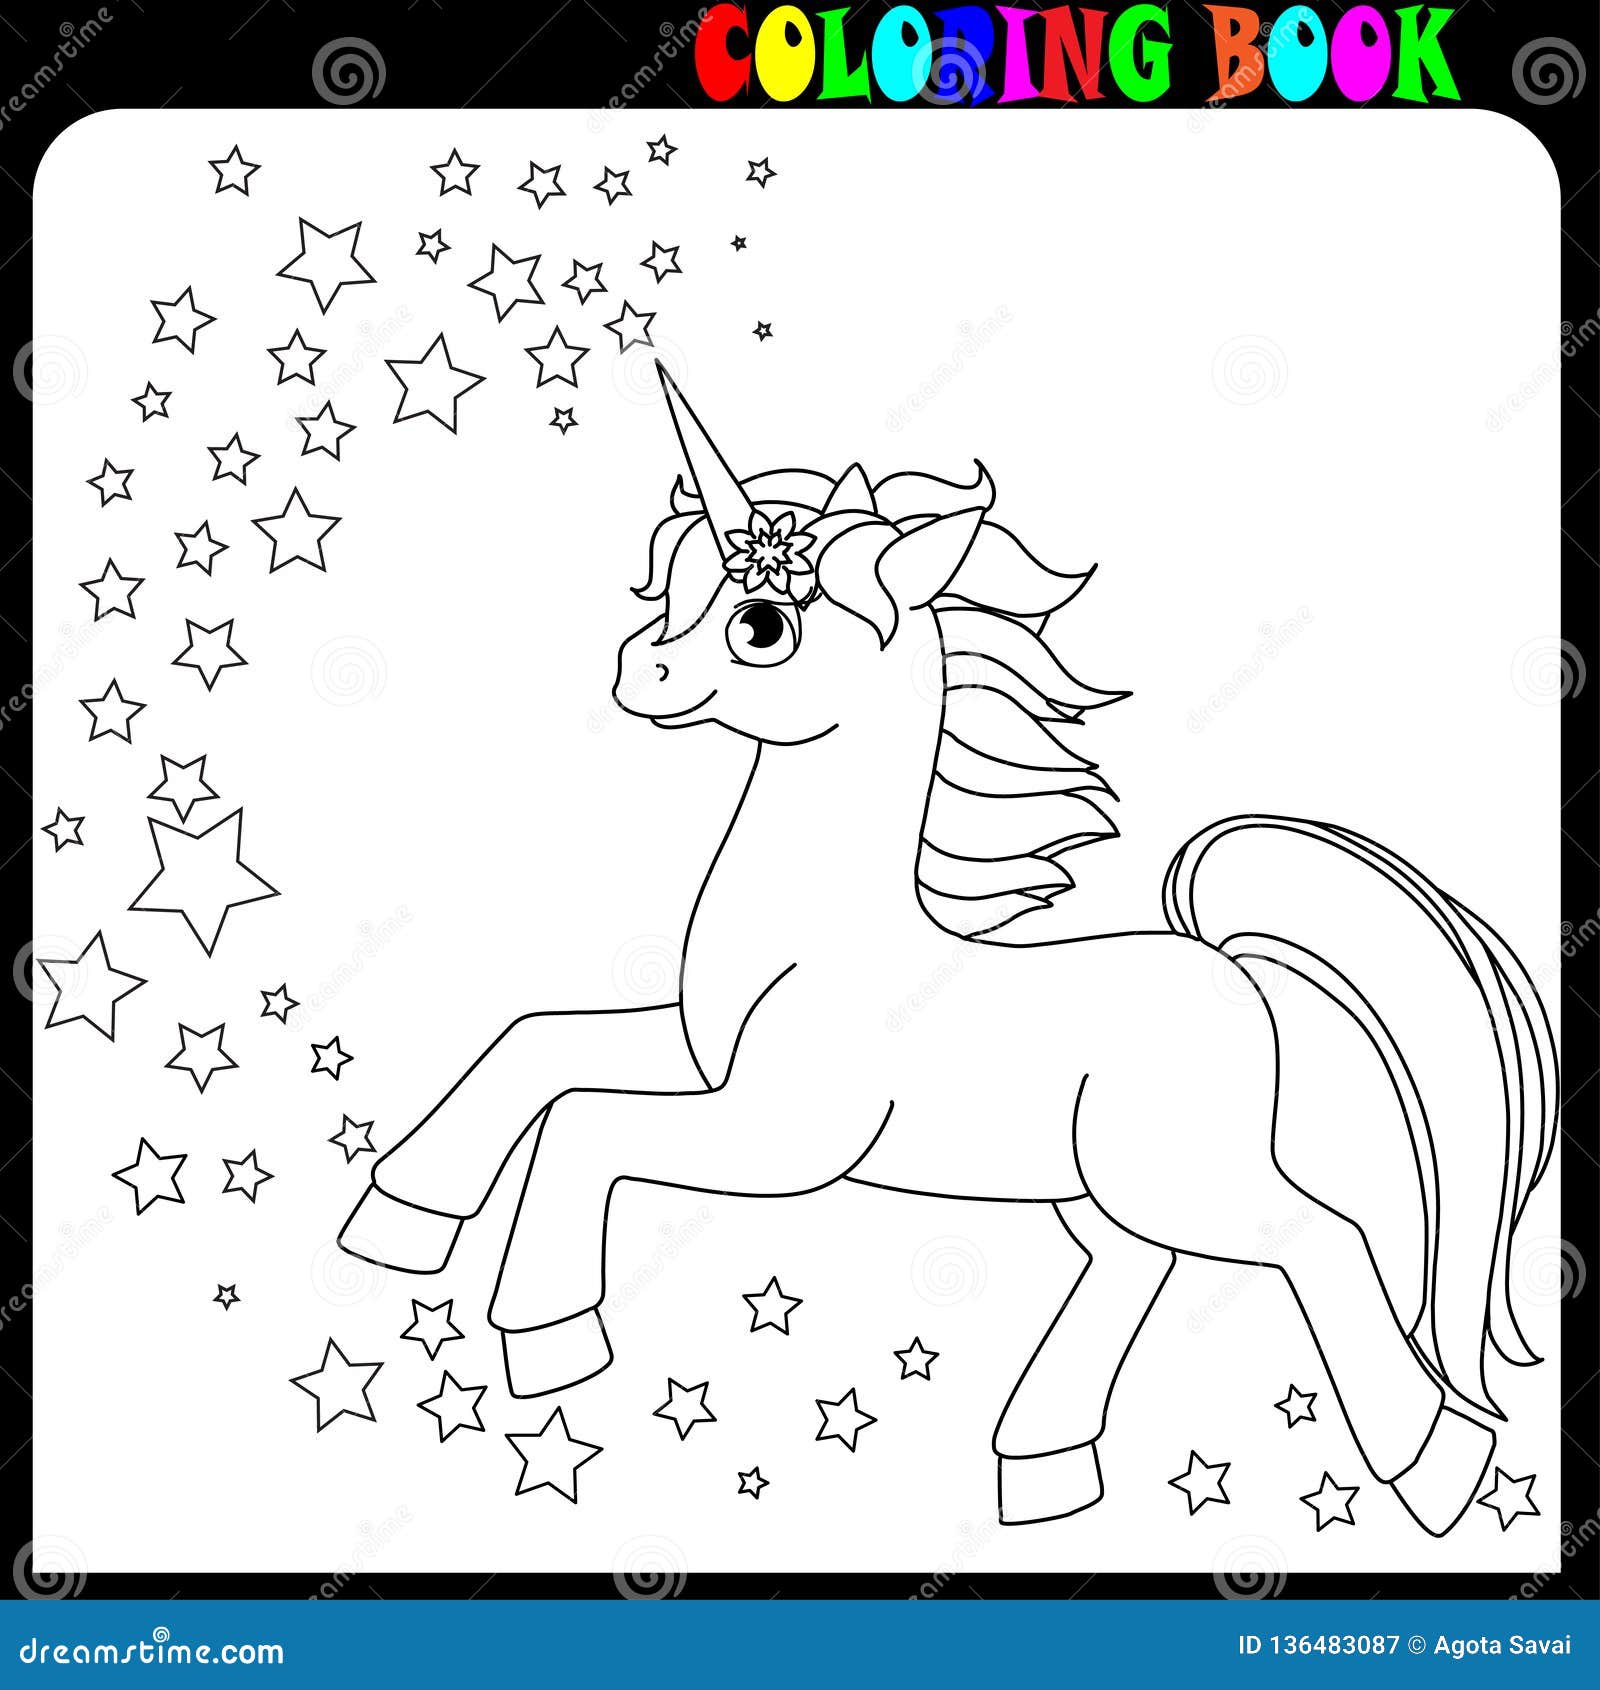 Download Coloring Book Unicorn Horse Or Pony Theme With Stars Stock Vector Illustration Of Template Animal 136483087